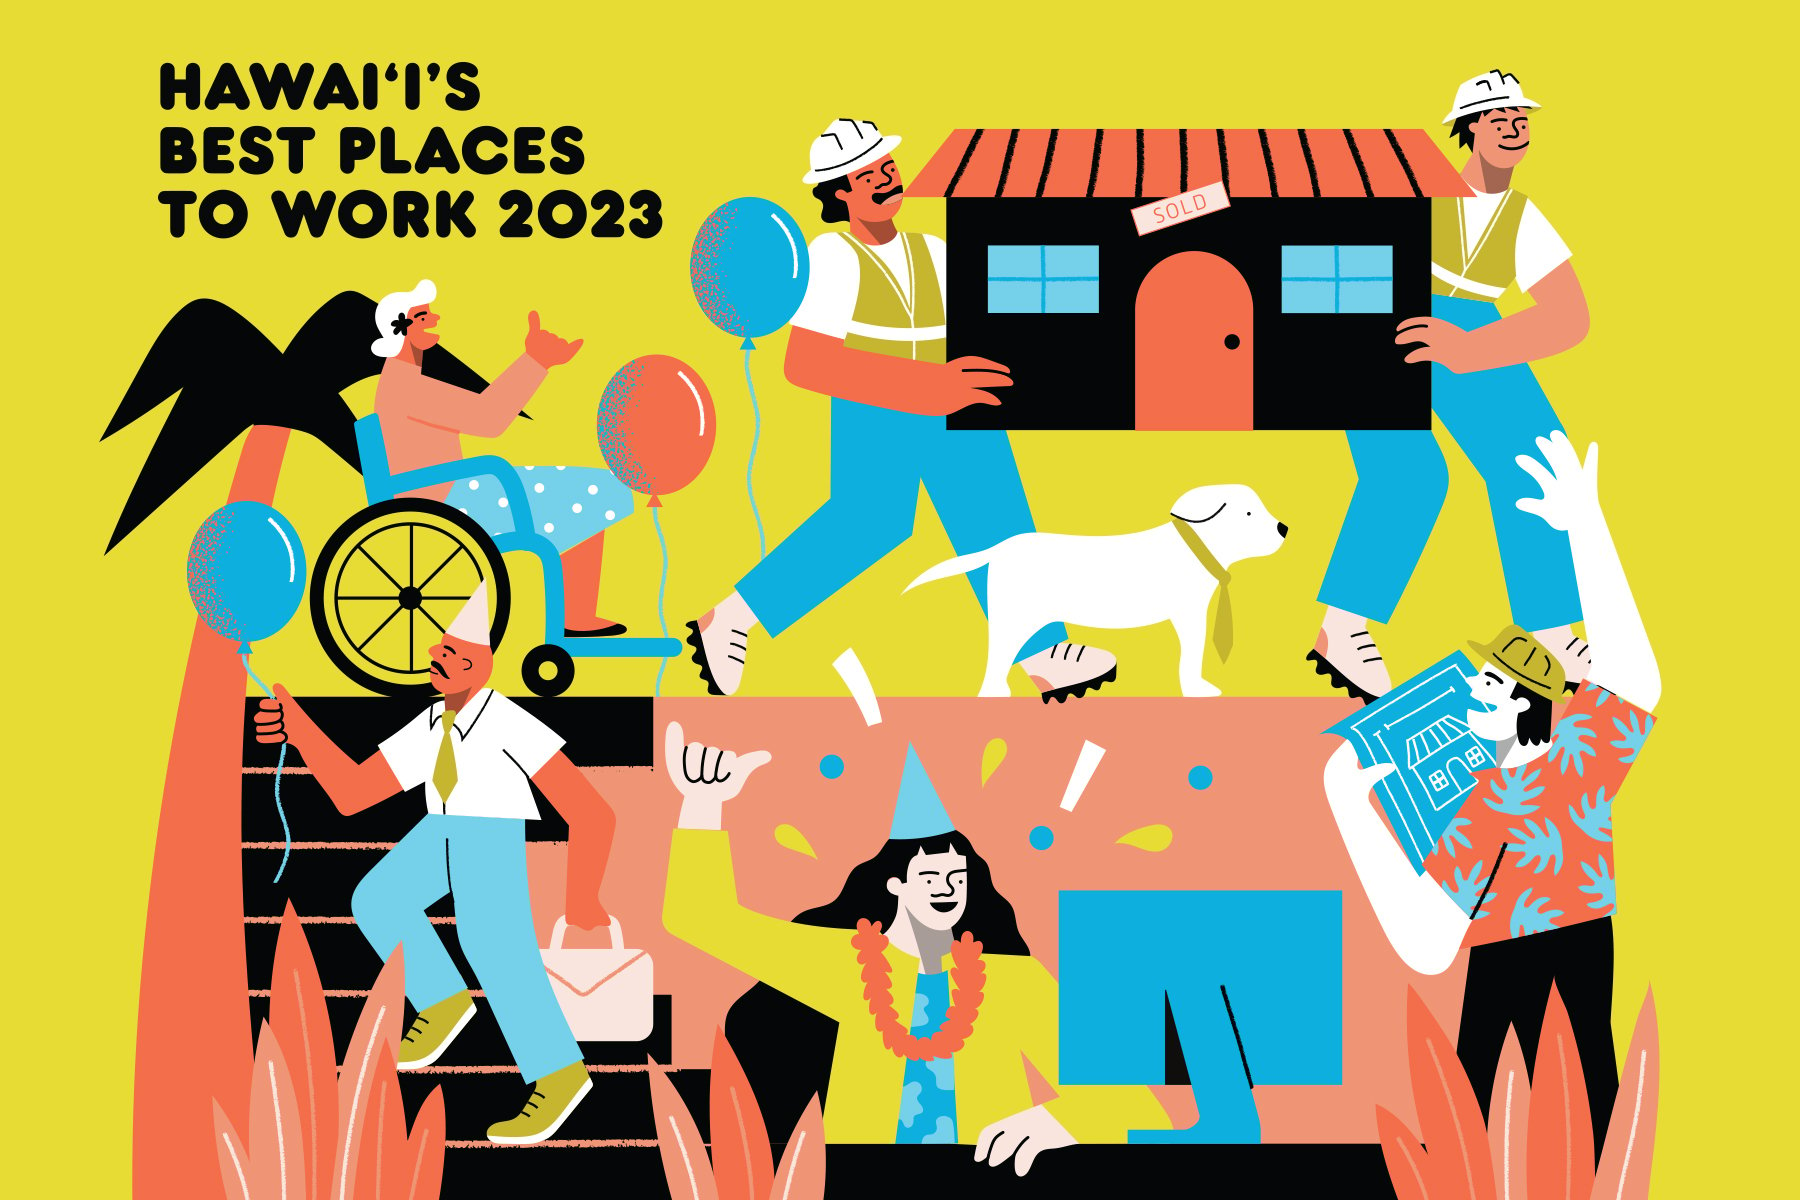 Hawai'i's Best Places to Work 2023 - Hawaii Business Magazine